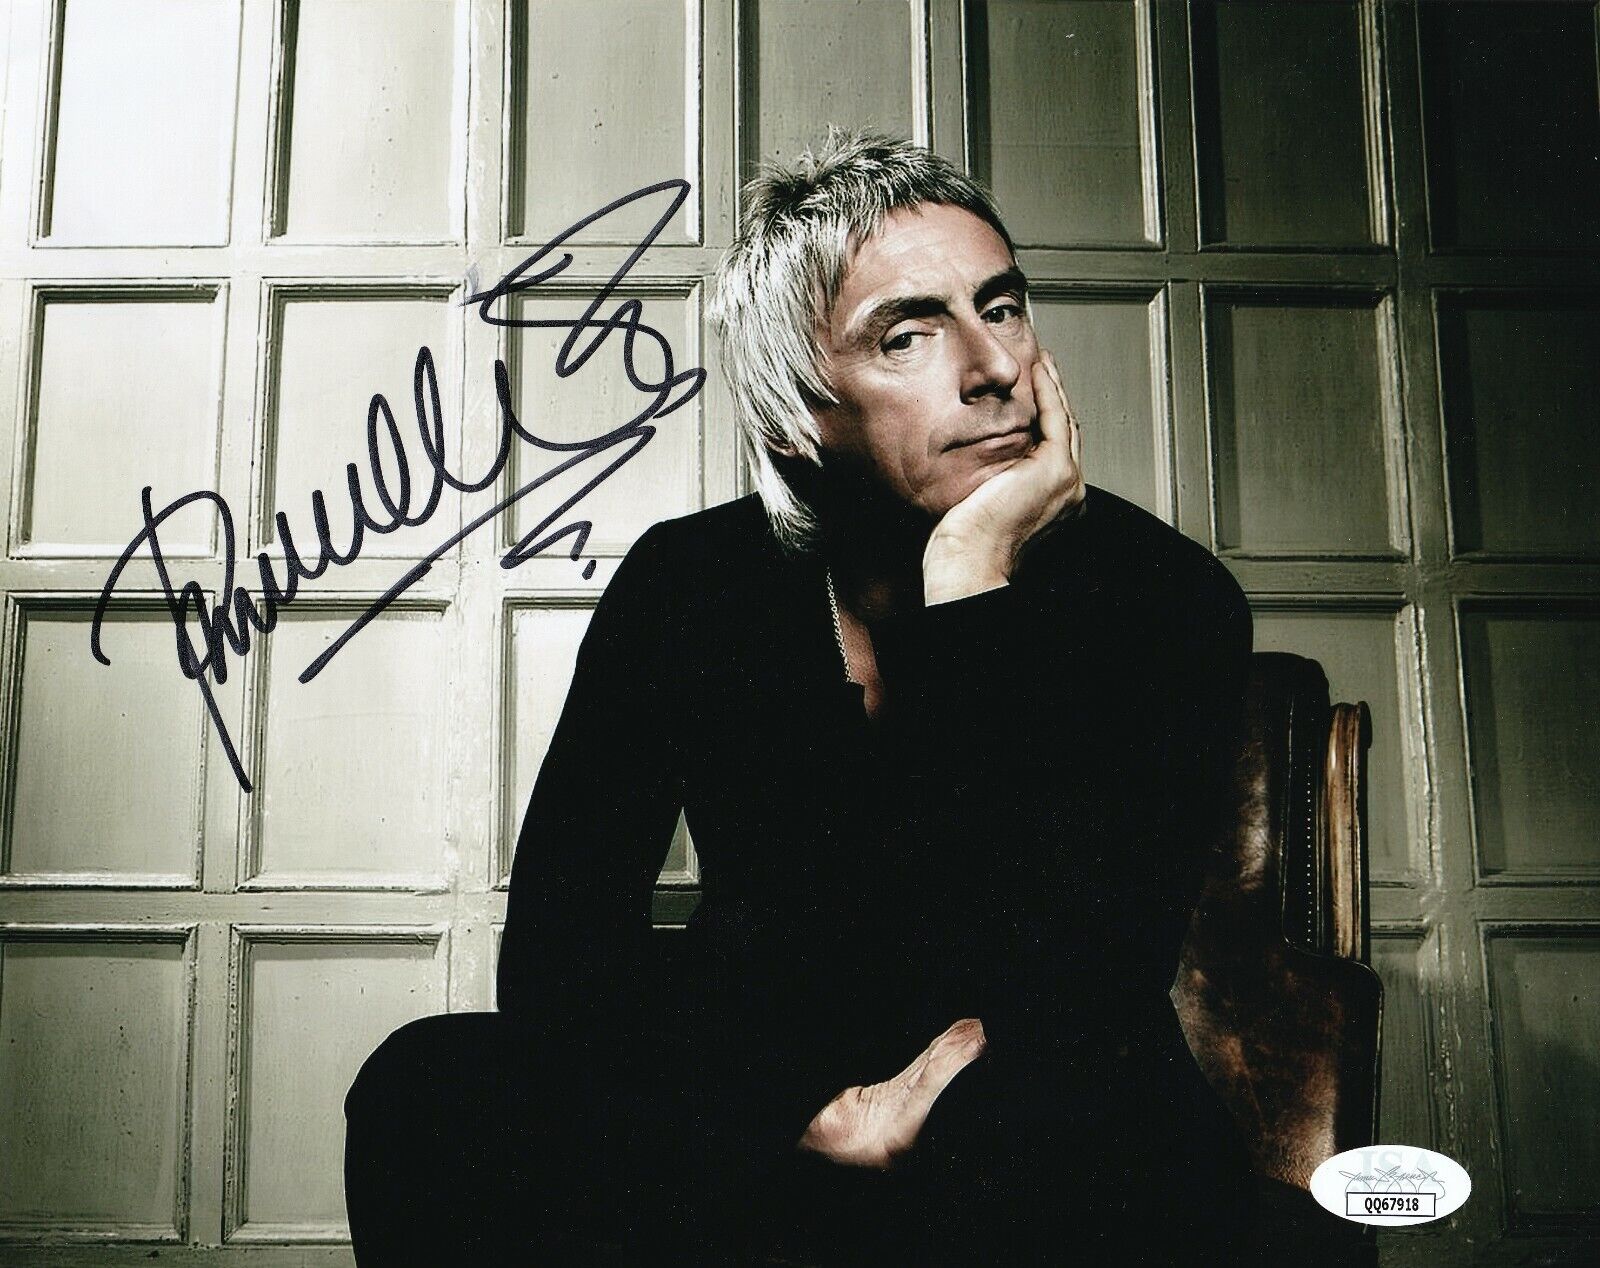 Paul Weller REAL hand SIGNED Photo Poster painting #3 JSA COA Autographed The Jam Style Council